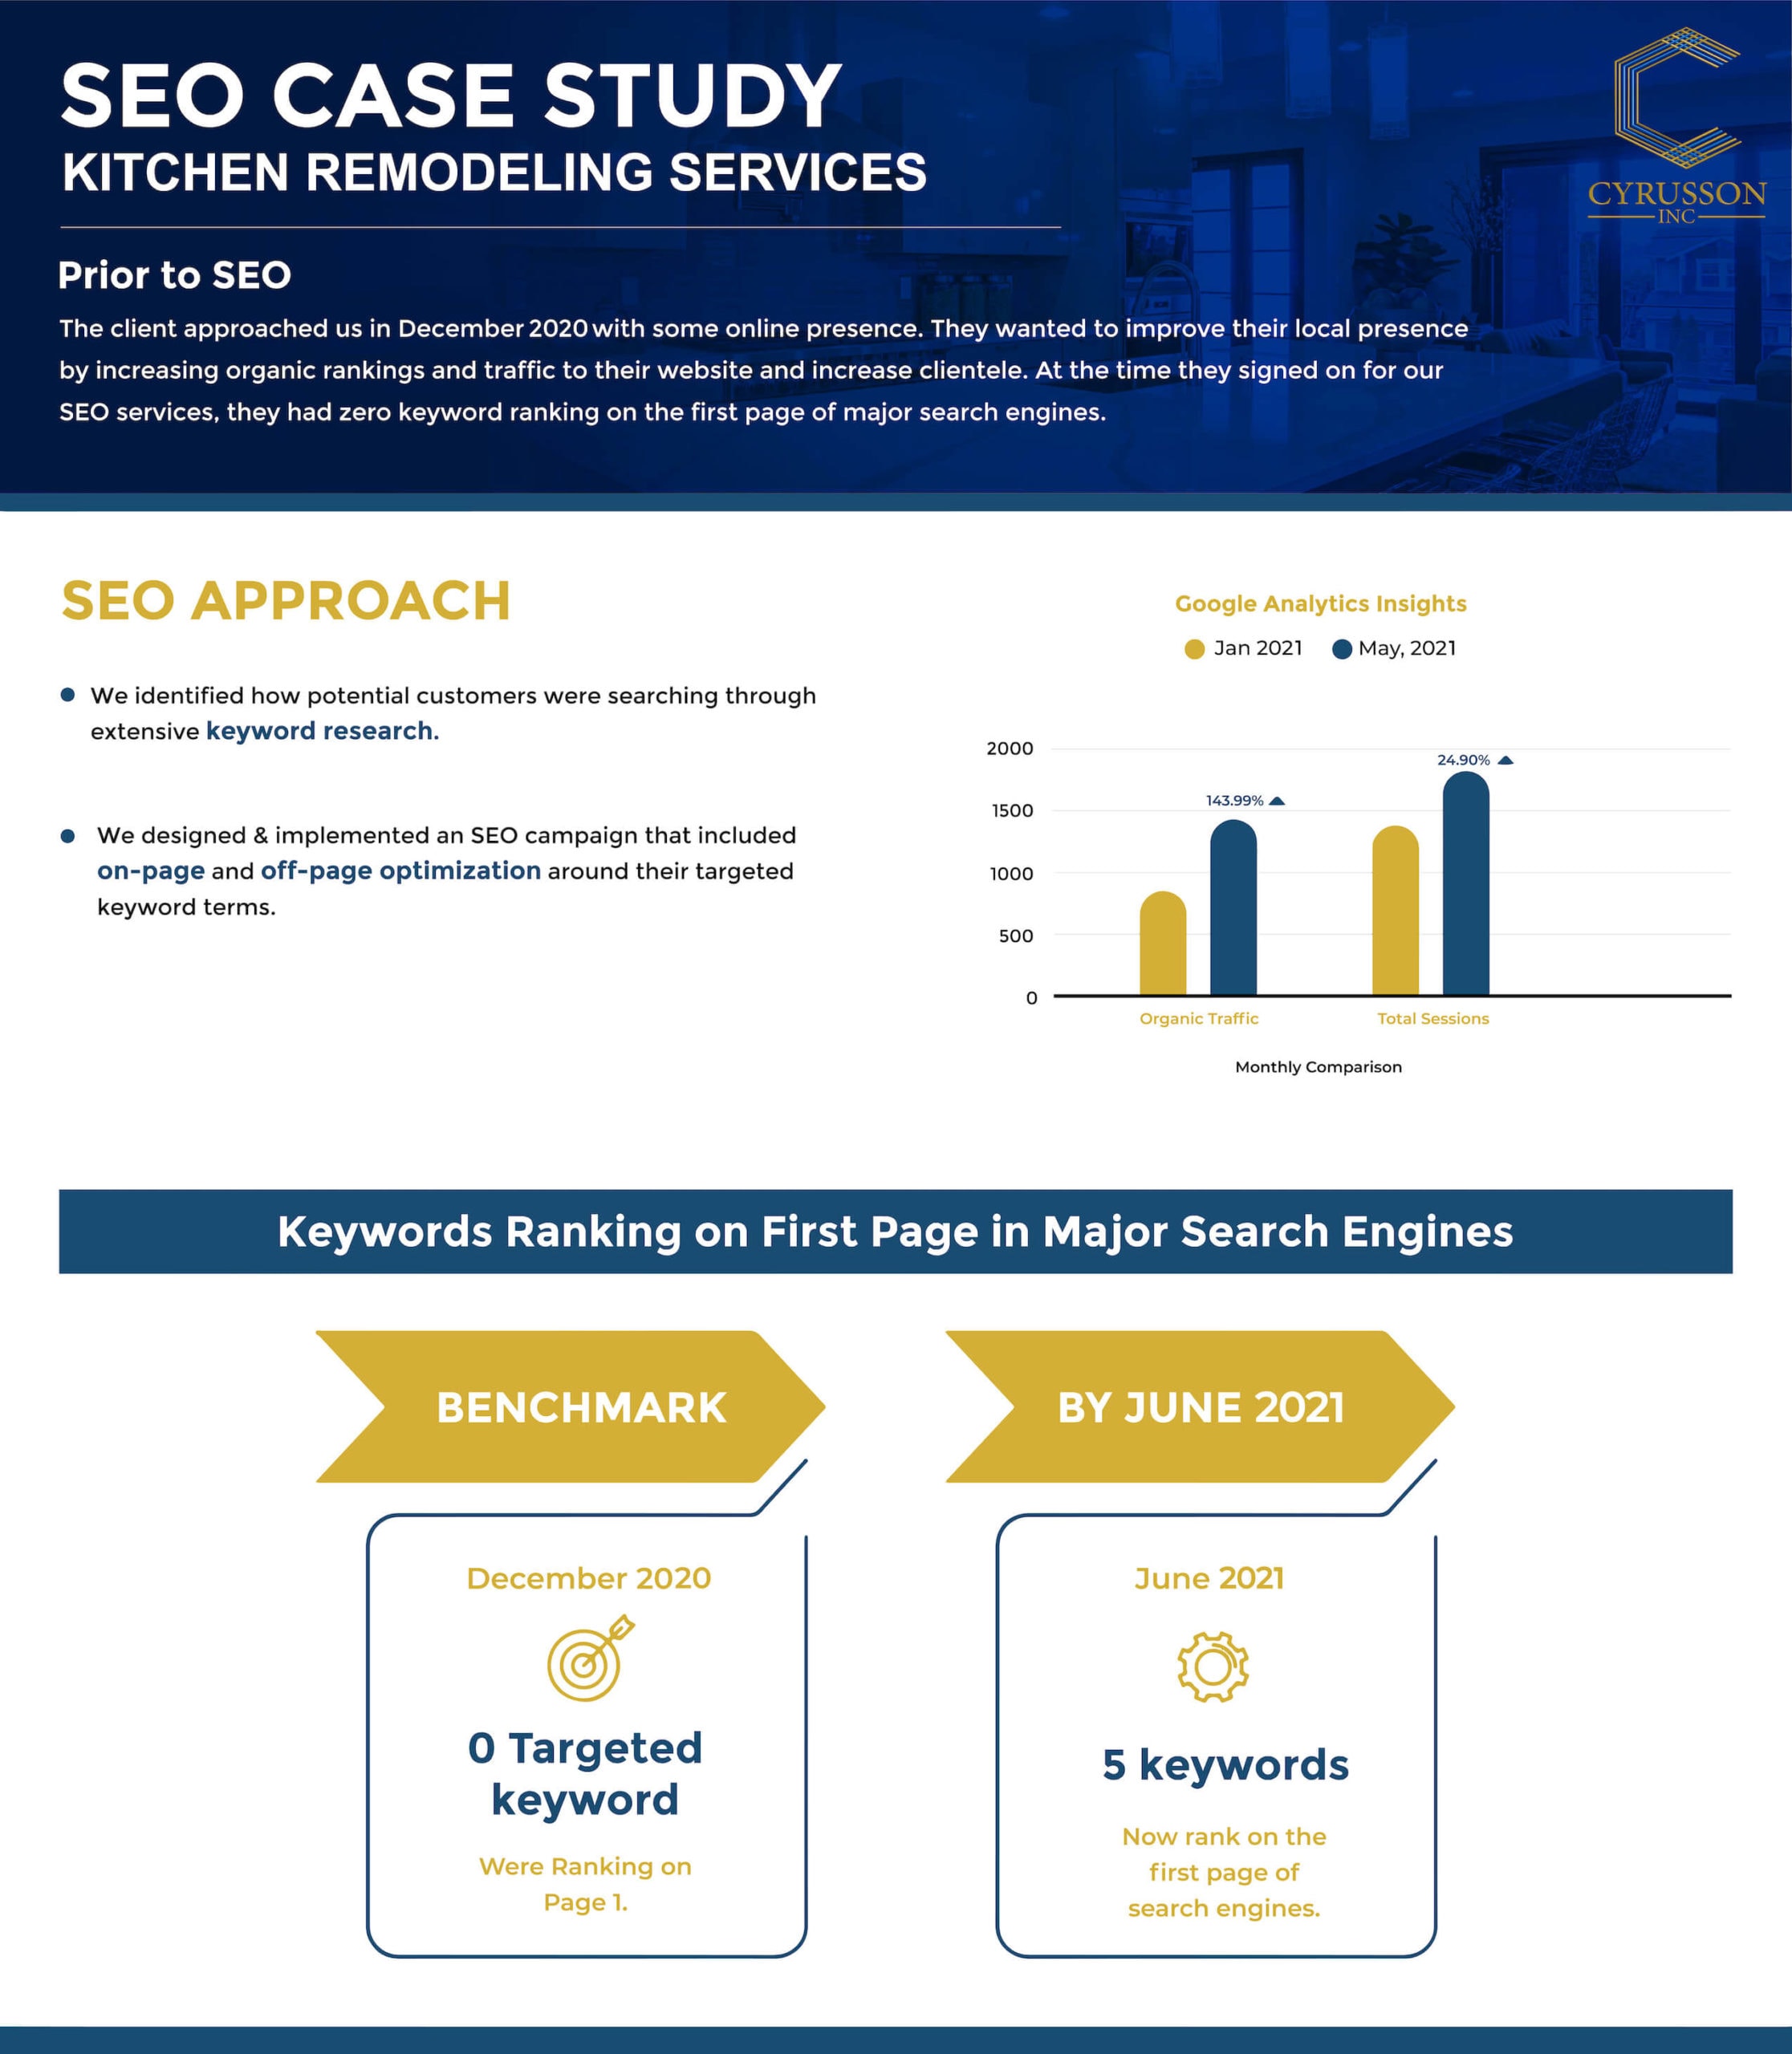 SEO Case Study - Kitchen Remodeling Services | Cyrusson